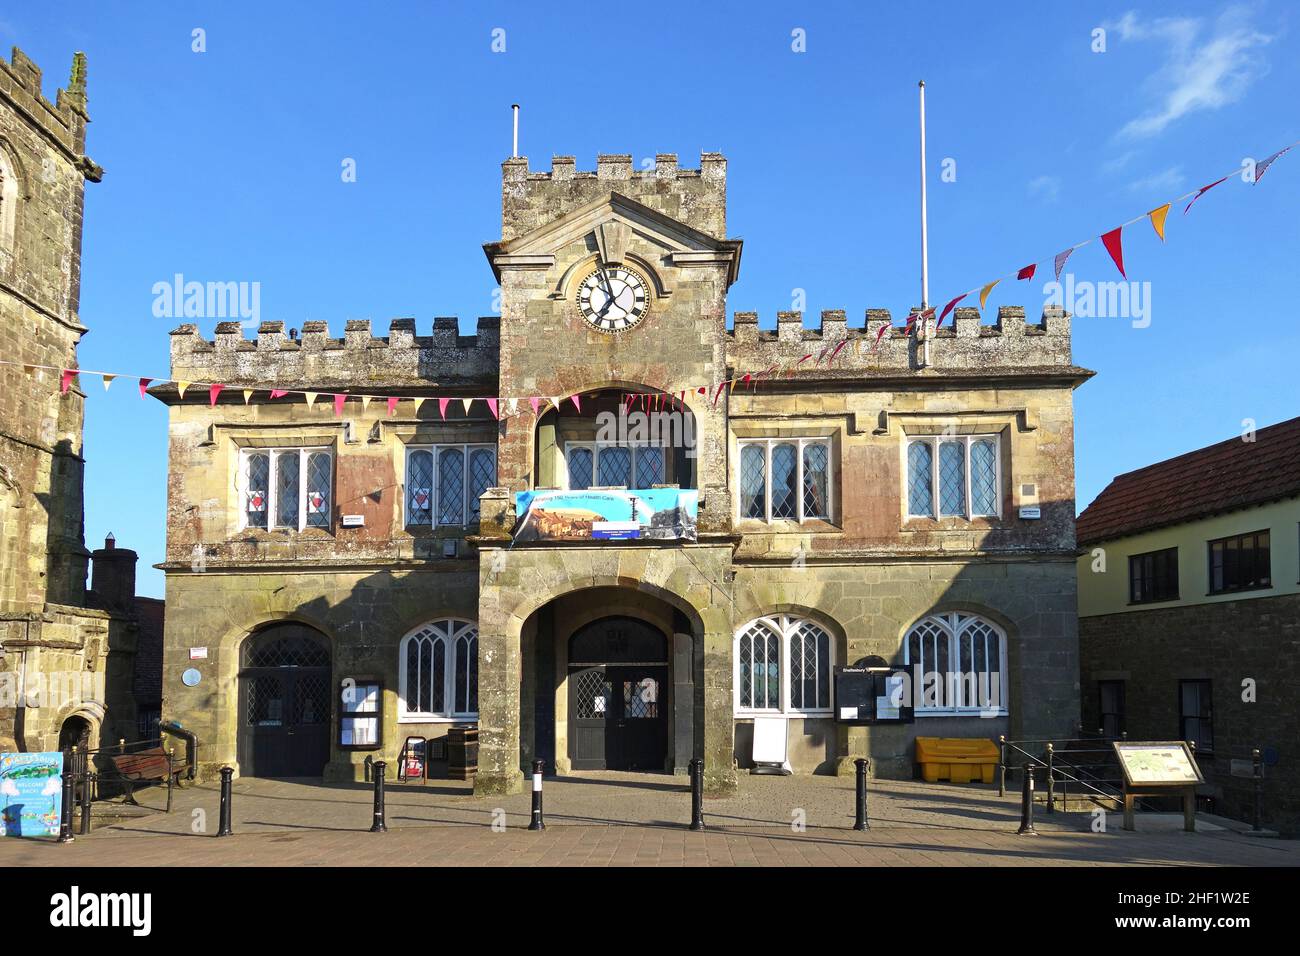 The town hall in shaftesbury dorset england Stock Photo